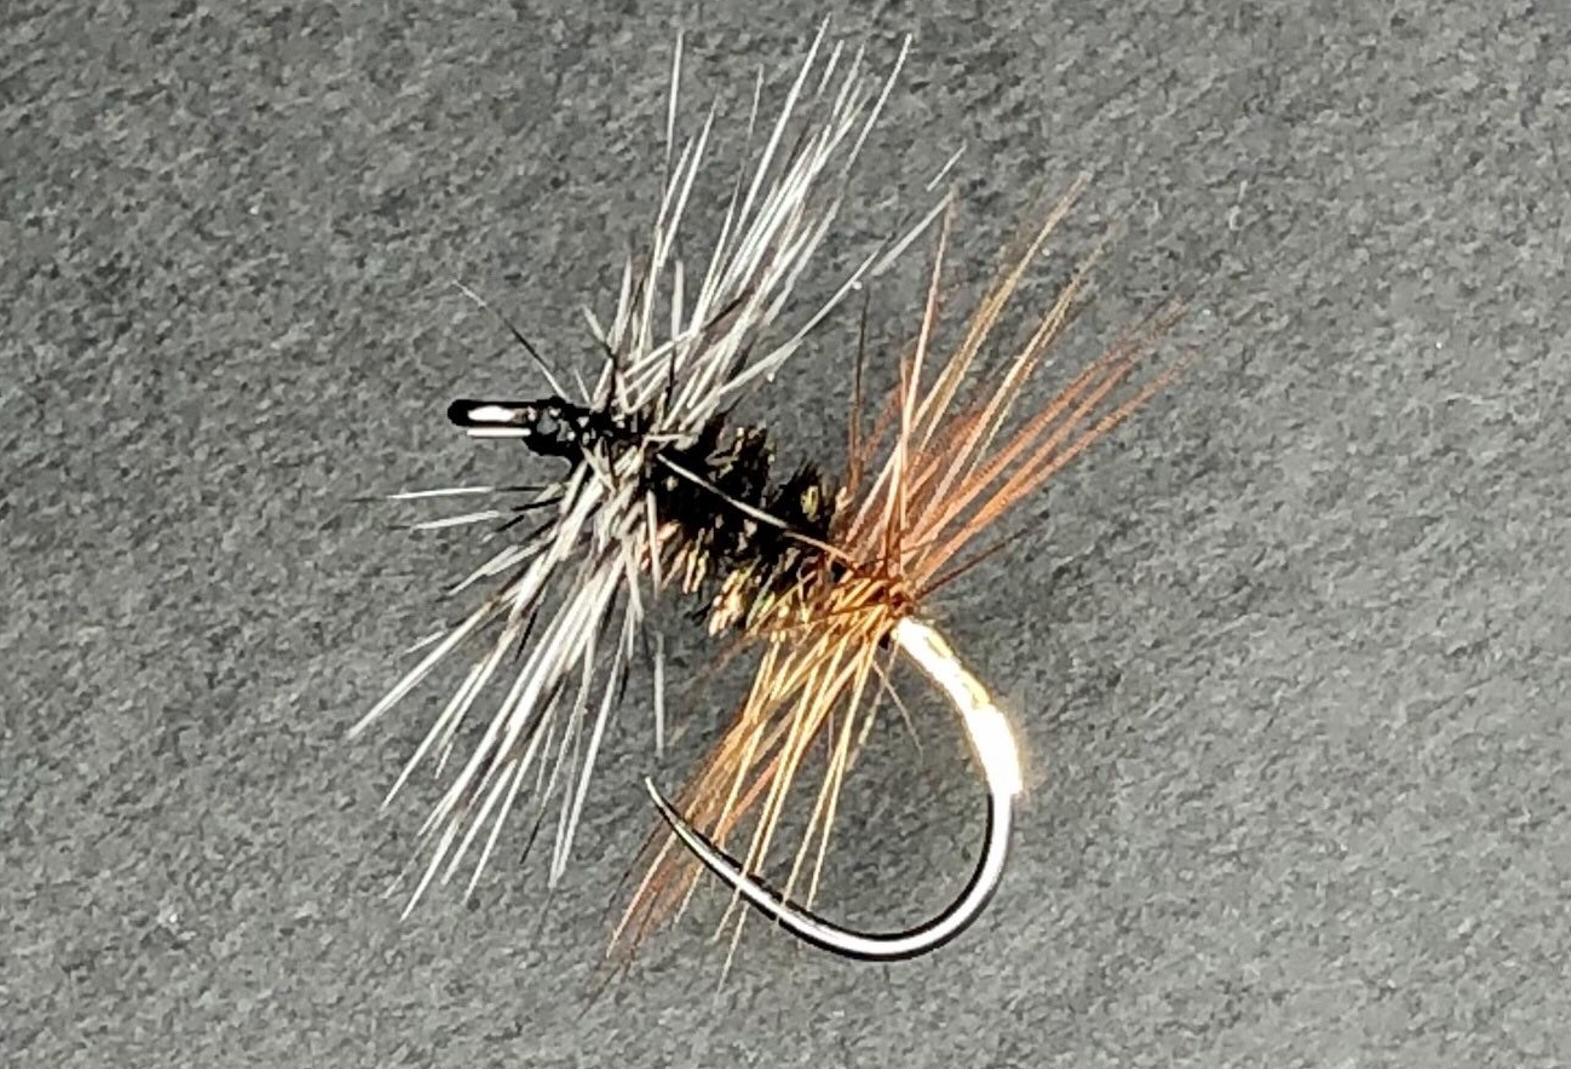 Renegade dry fly - grizzly and brown hackle